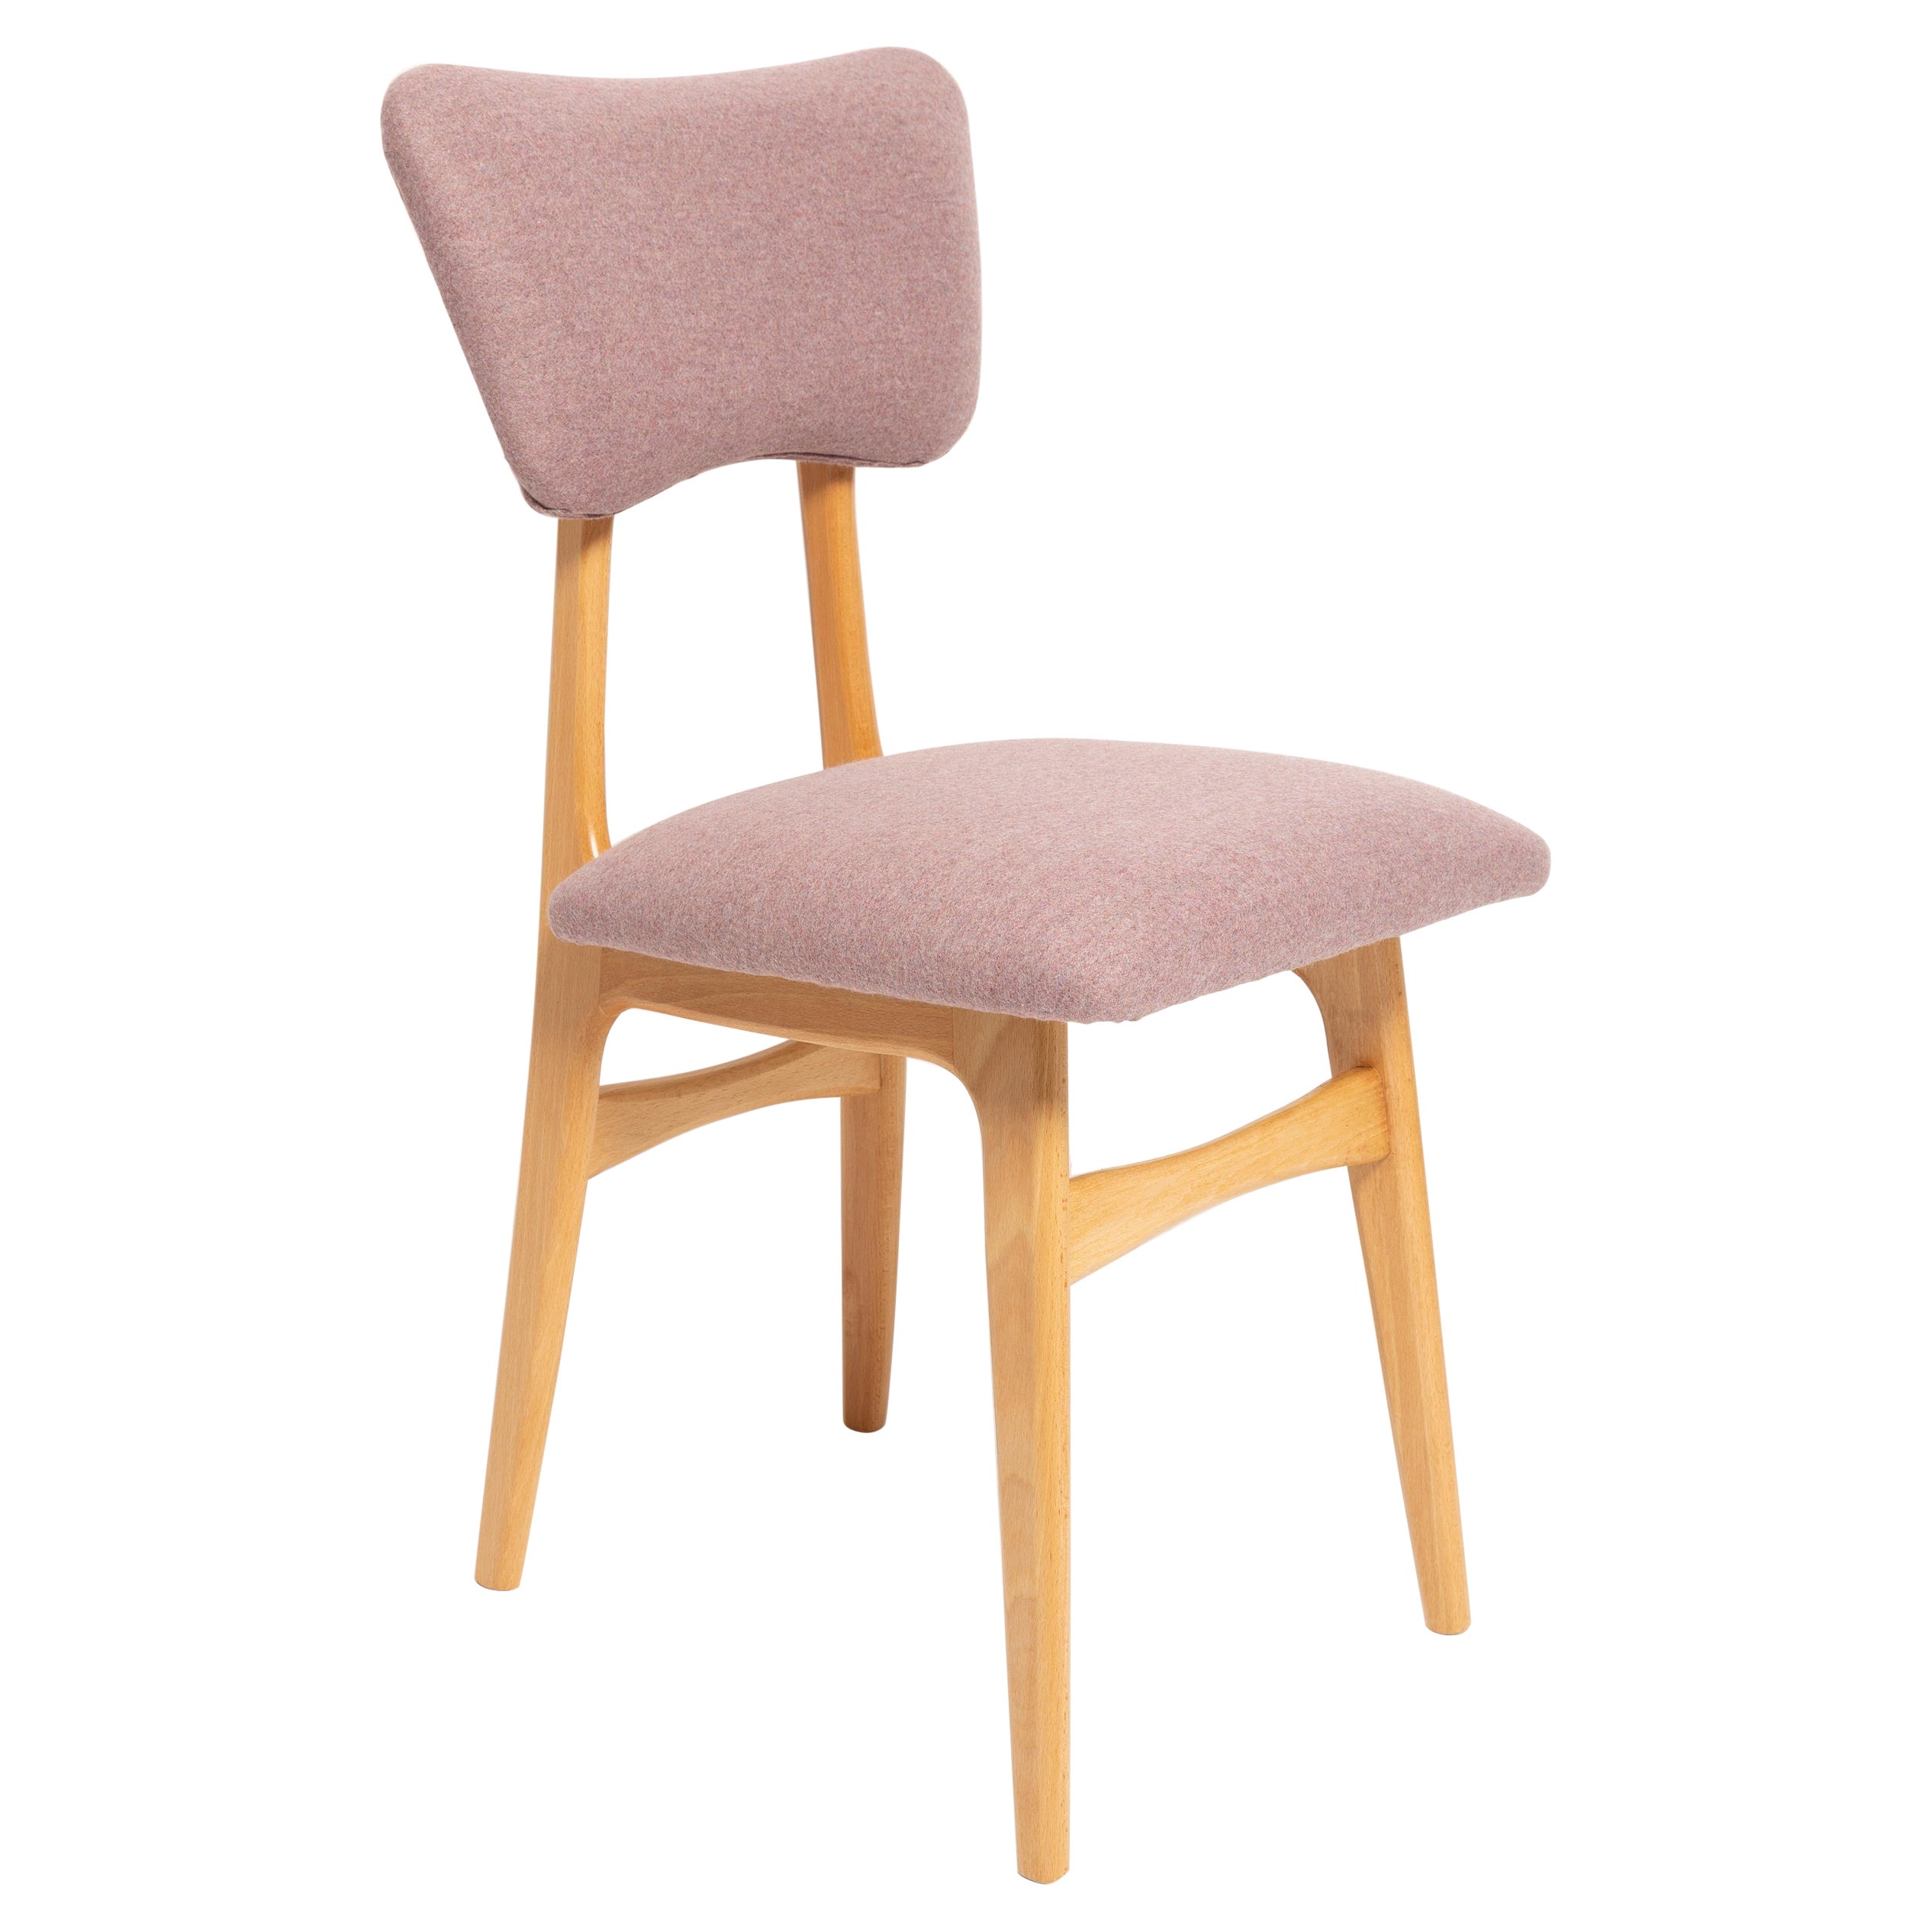 Butterfly Dining Chair, Pink Wool, Light Wood, Europe For Sale